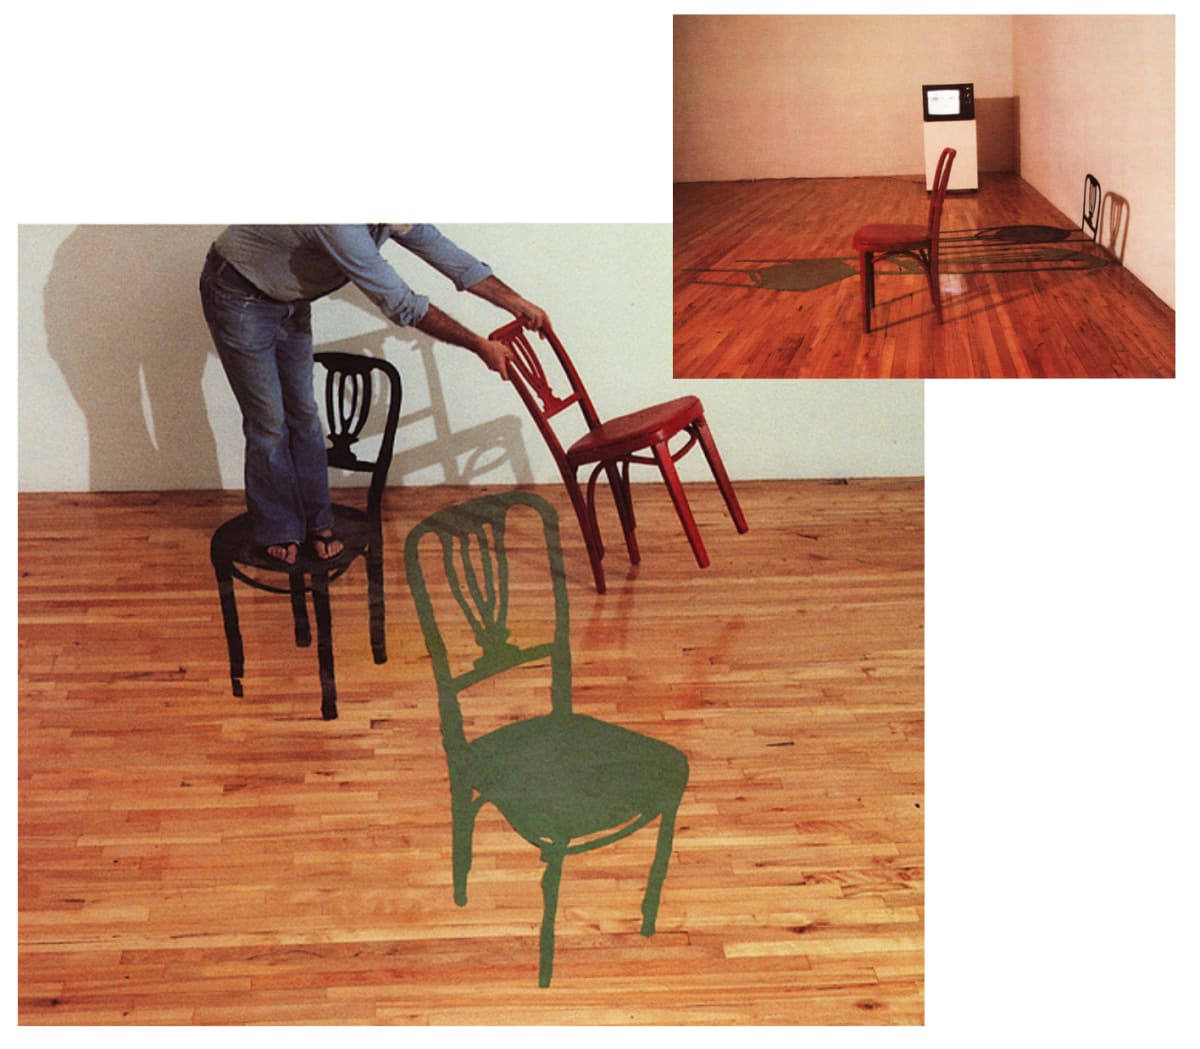 The Chair by Buky Schwartz  Image: The Chair (1980)